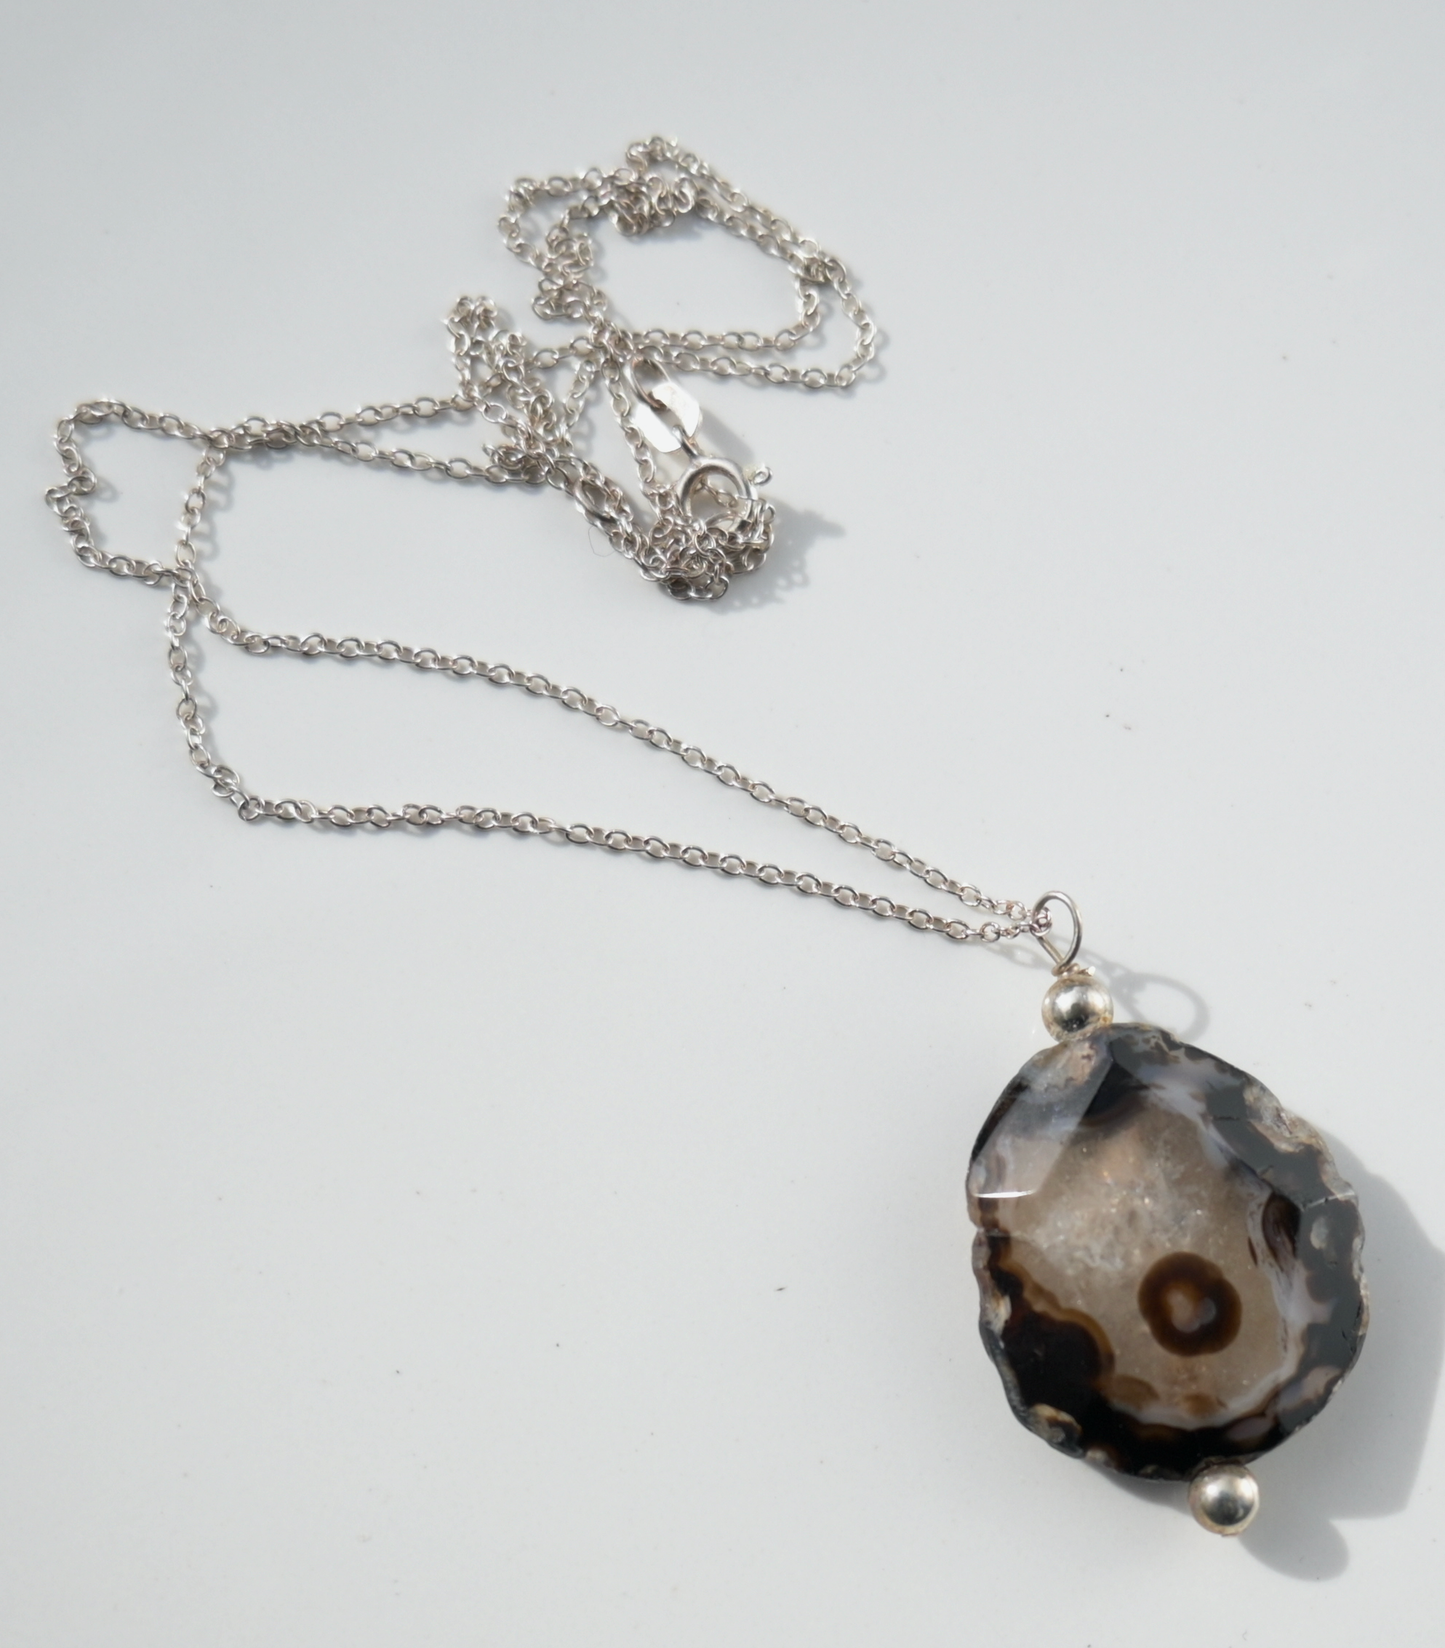 Agate Slice Pendant with a Sterling Silver Chain.